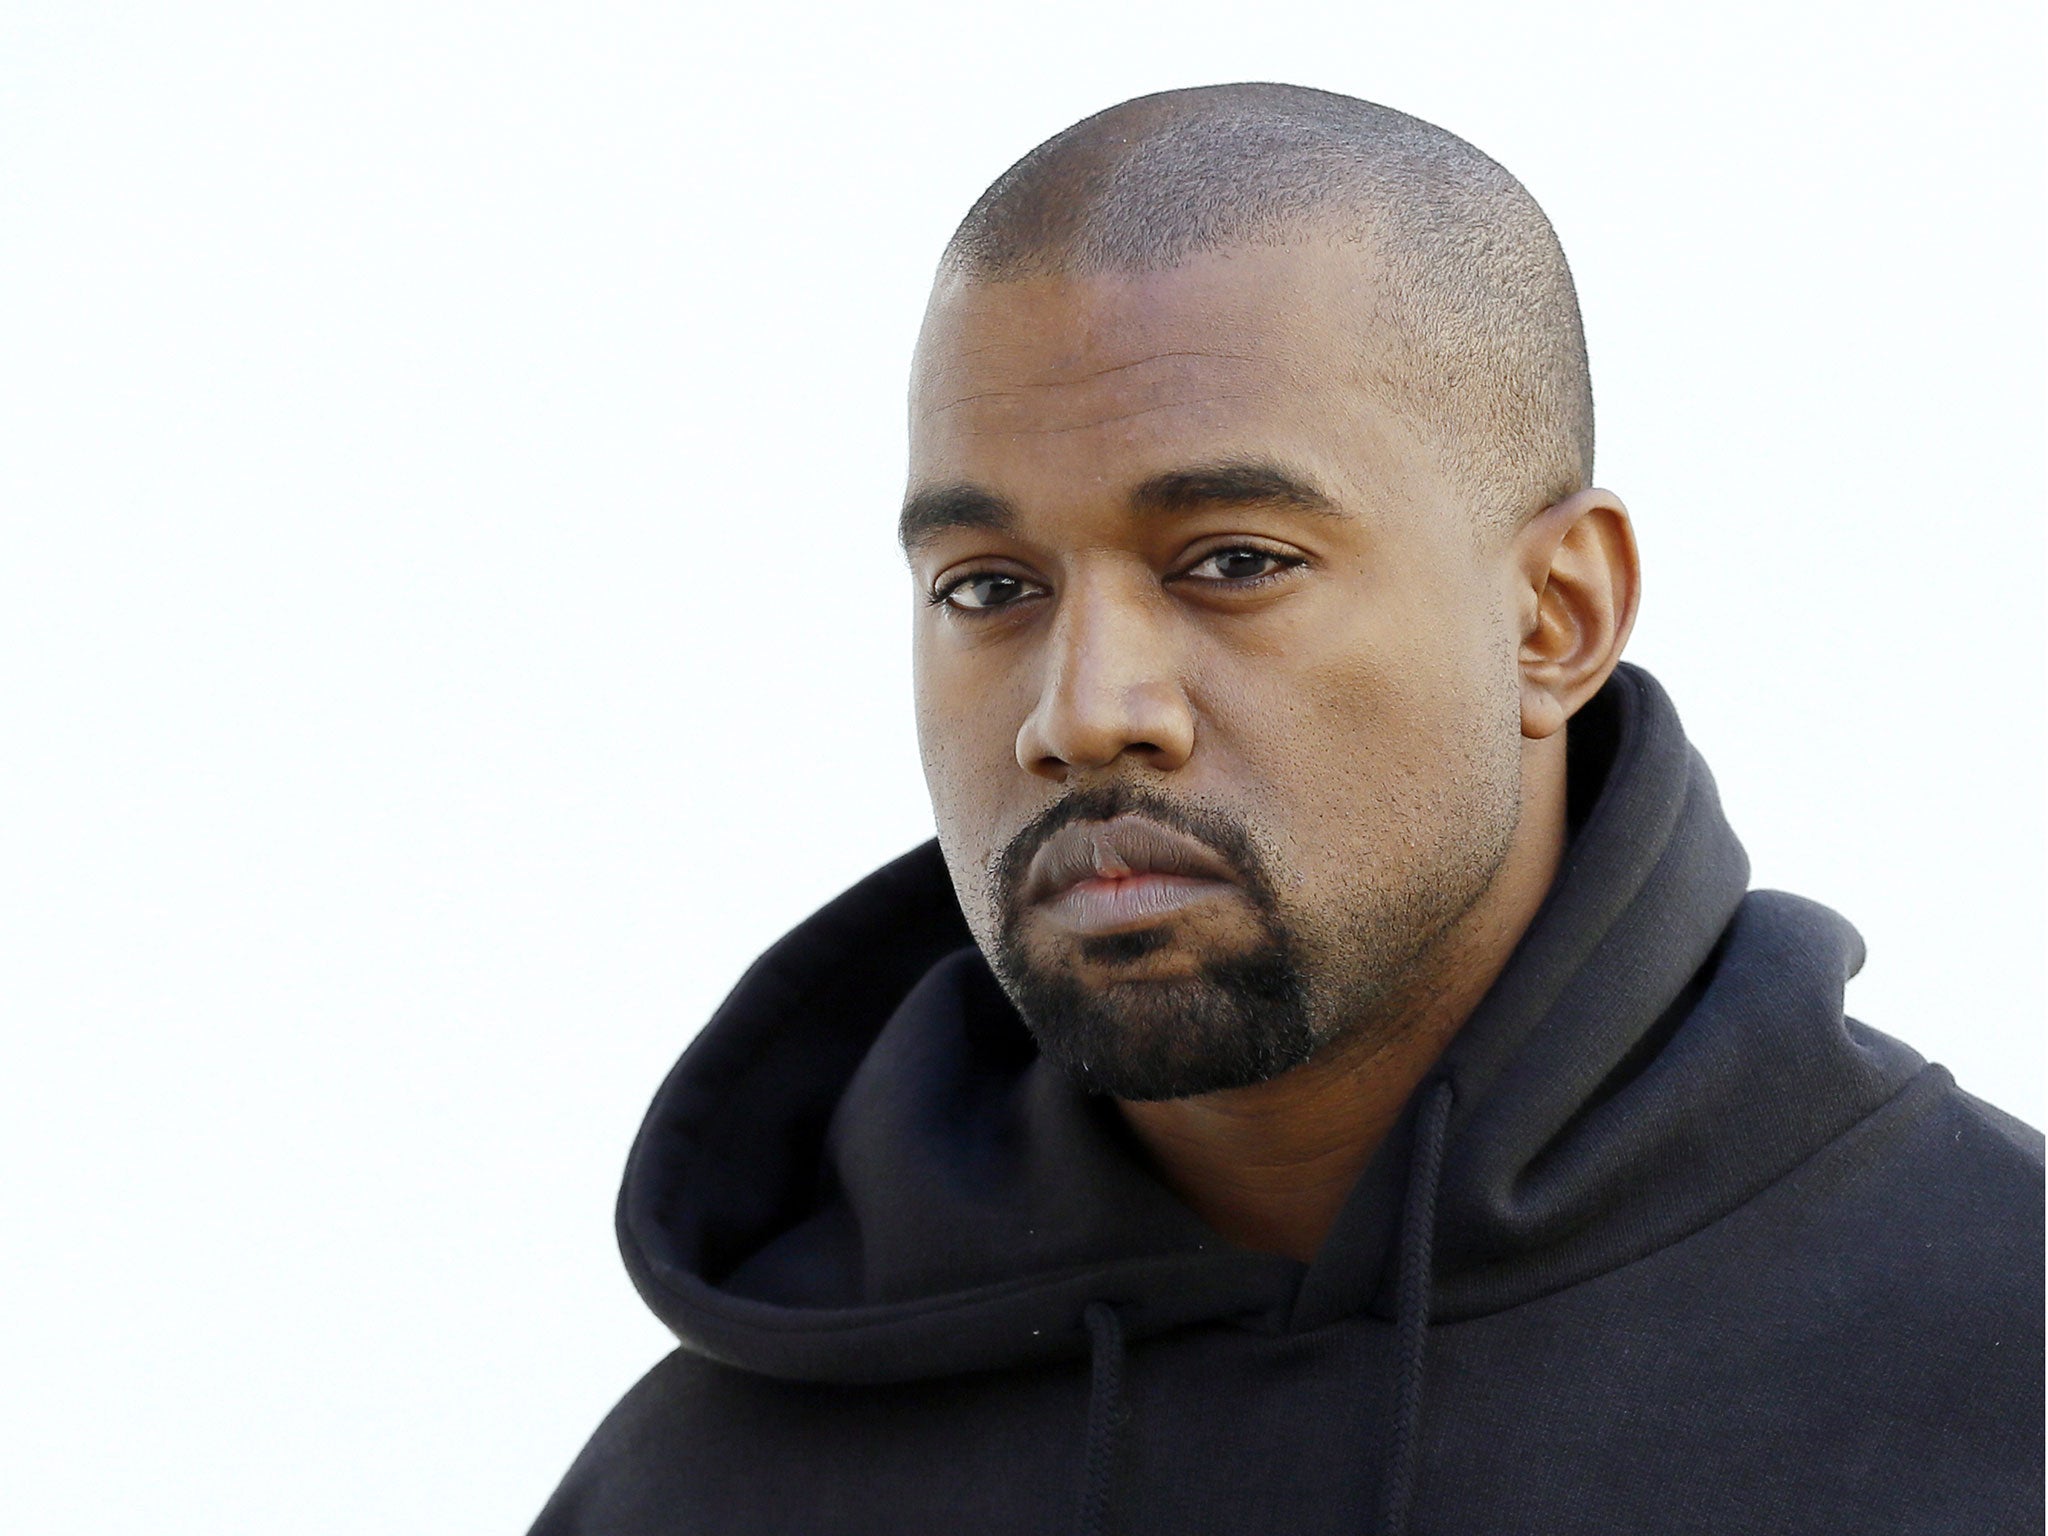 It is speculated Kanye met with Ikea to discuss a potential design collaboration